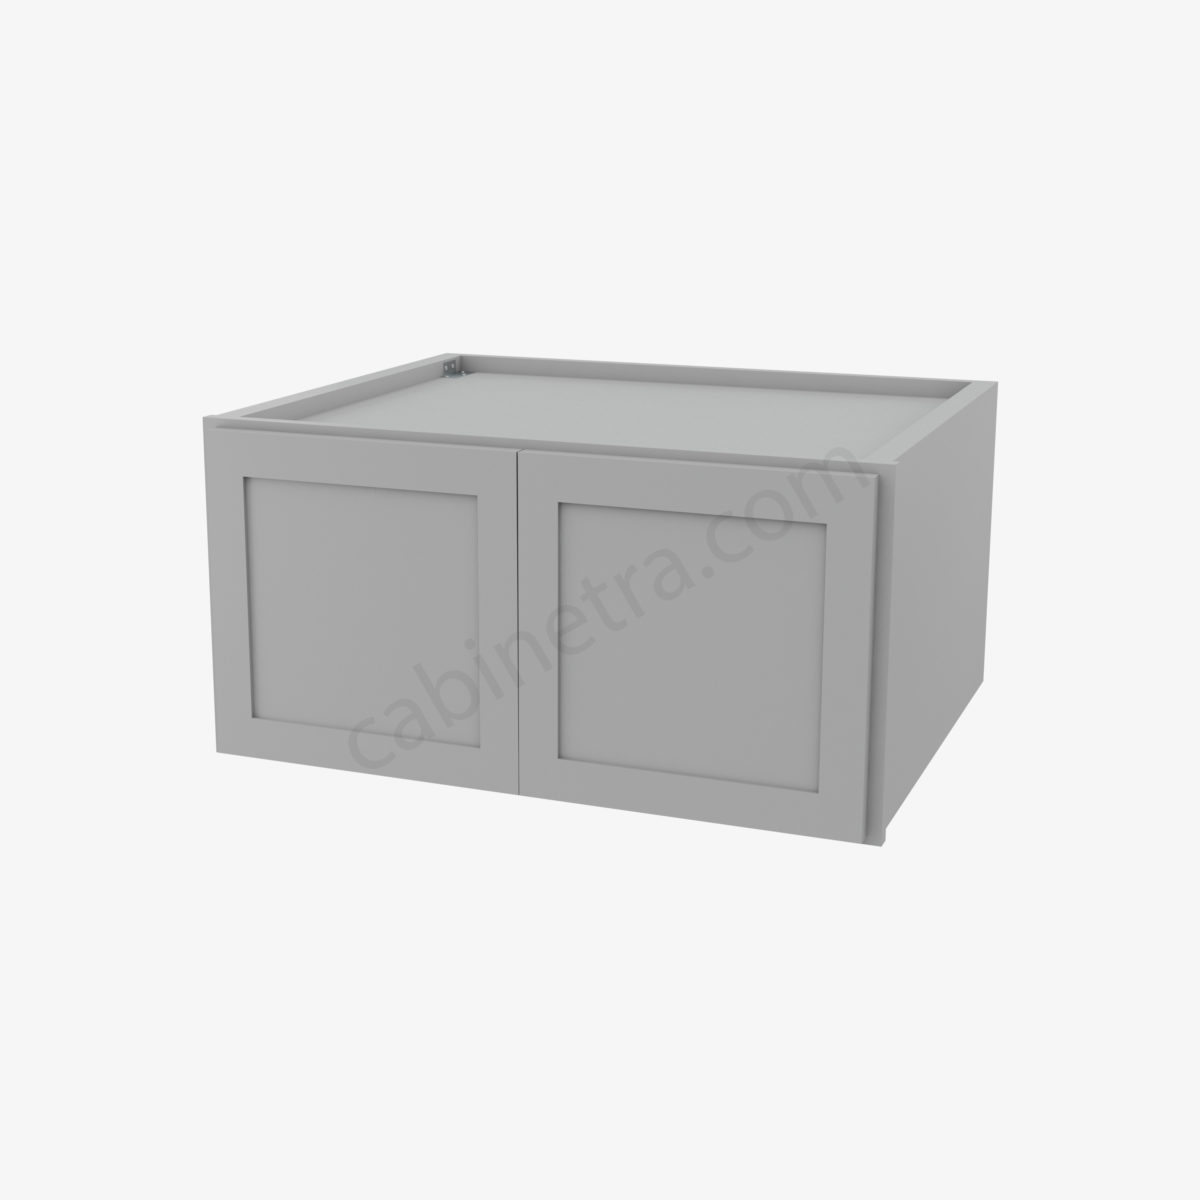 AB W301524B 0 Forevermark Lait Gray Shaker Cabinetra scaled